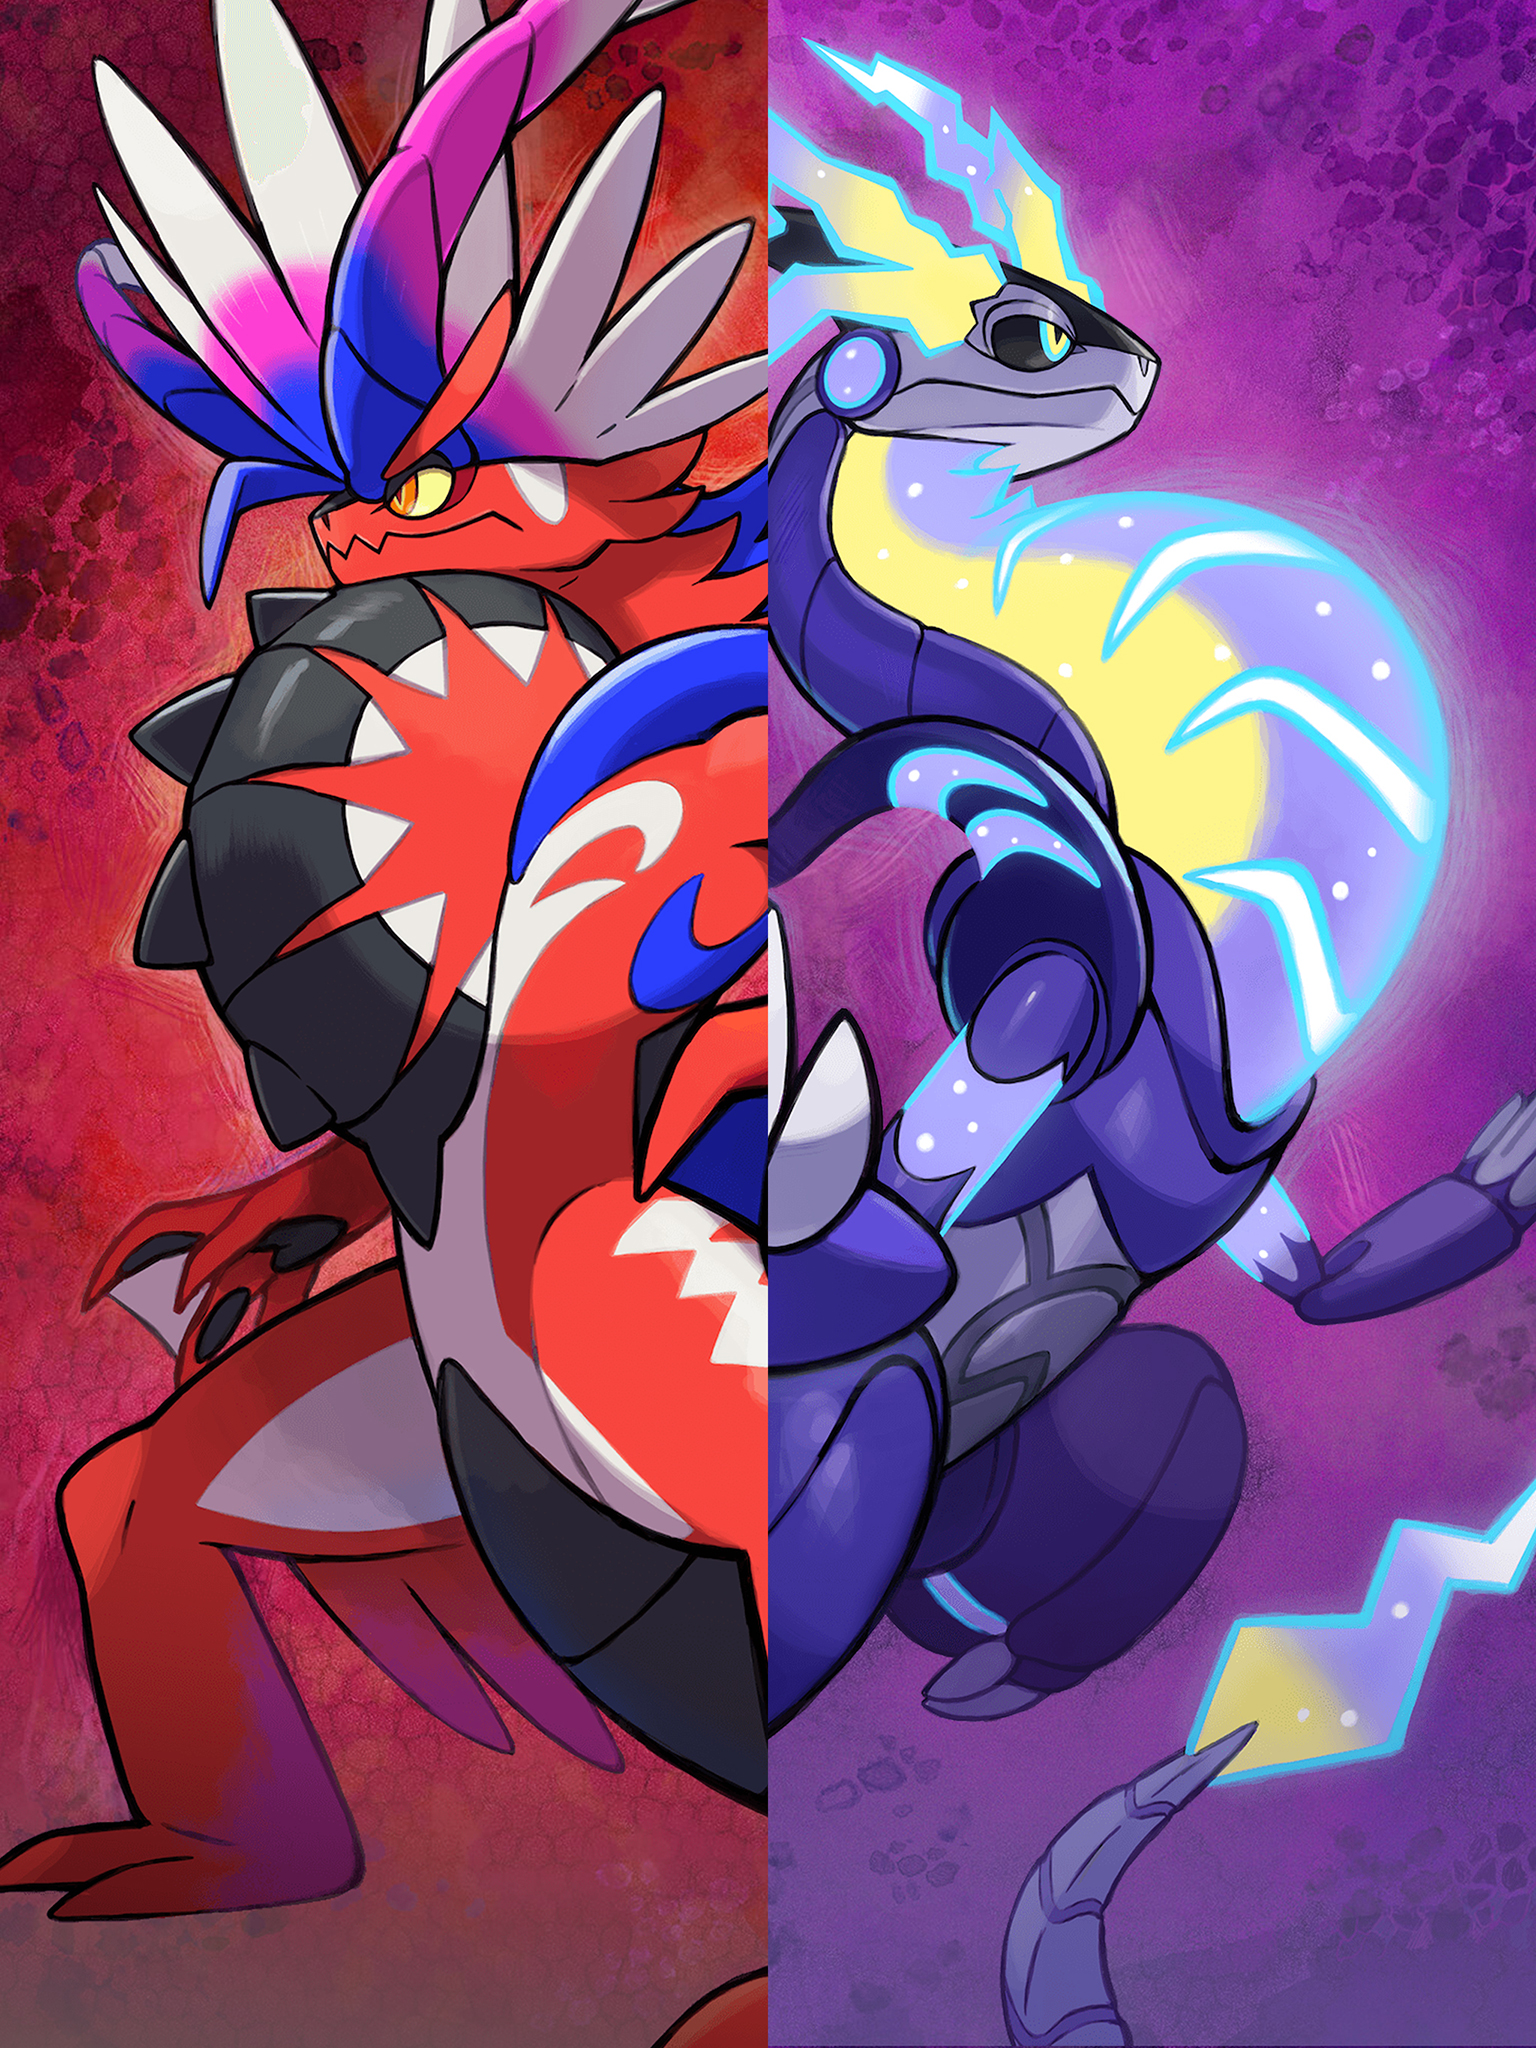 Original Content] Pokemon Scarlet and Violet Phone Wallpapers